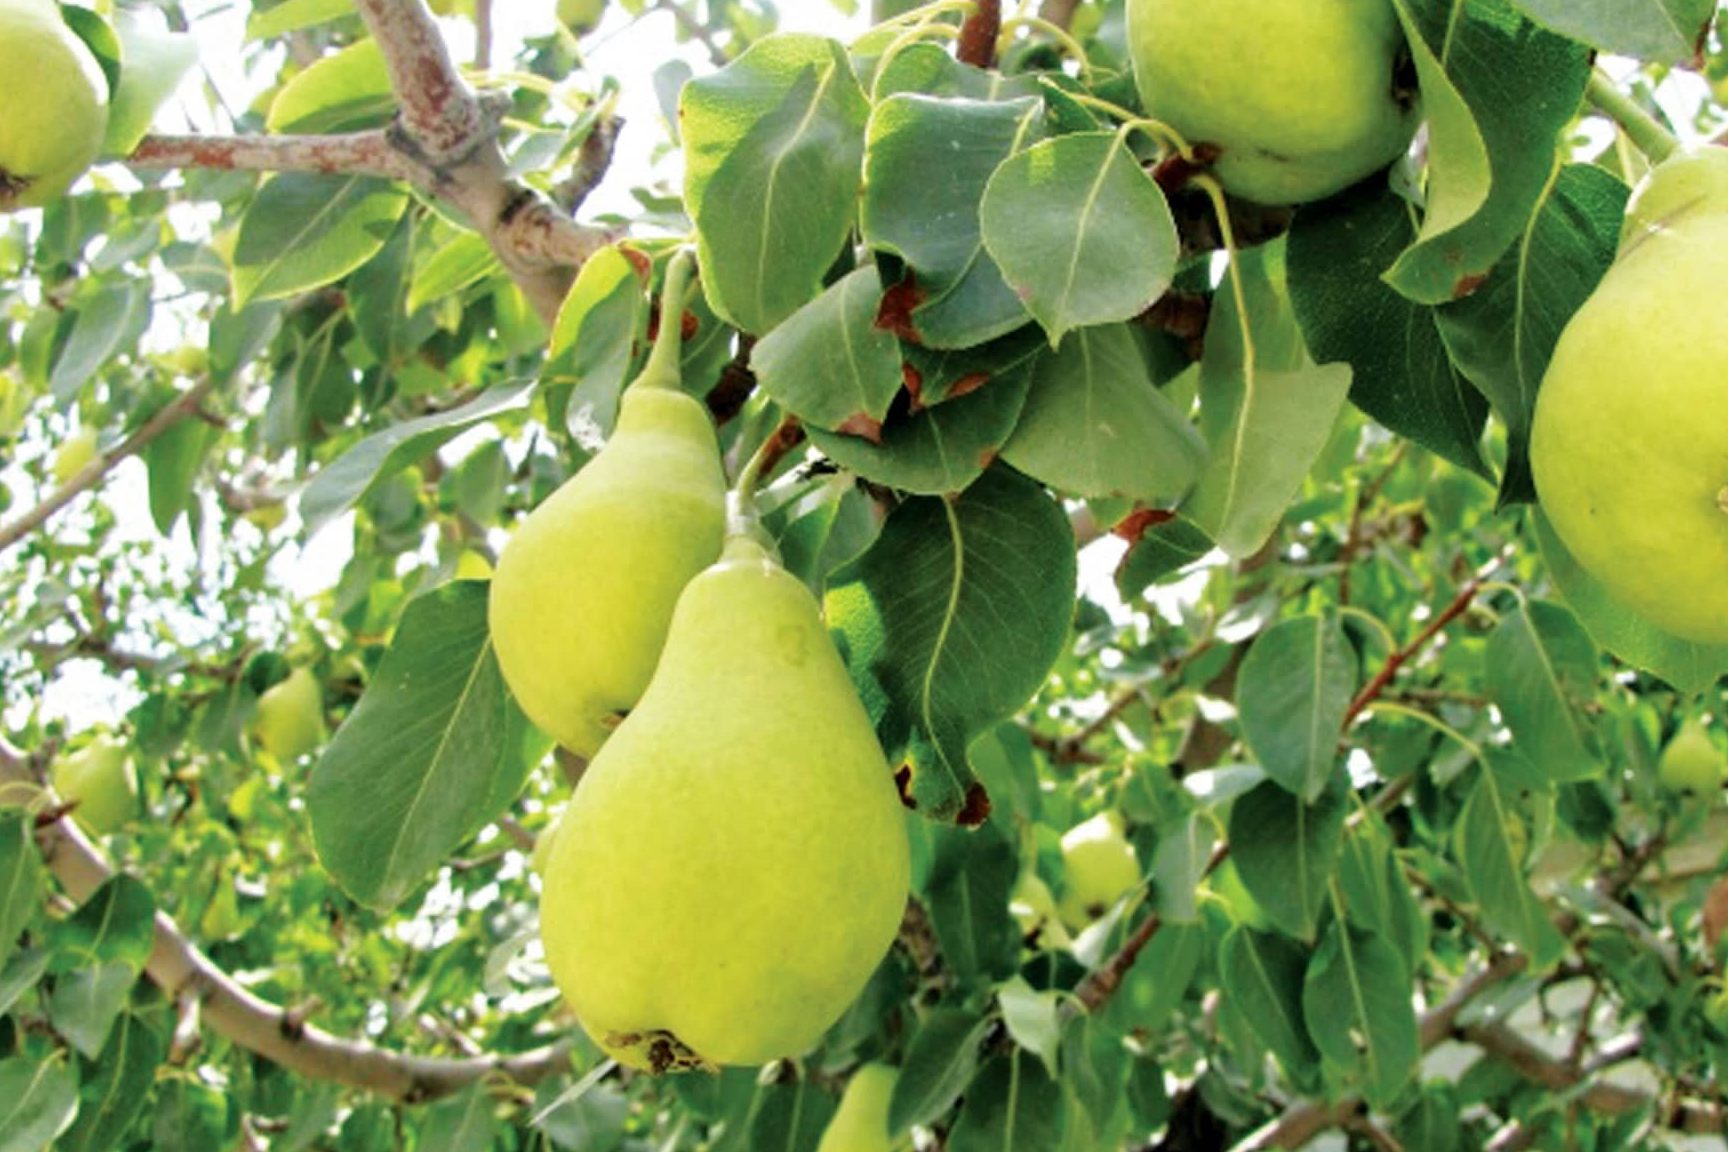 Buy Seckel Pear | Selling All Types of Seckel Pear At a Reasonable Price